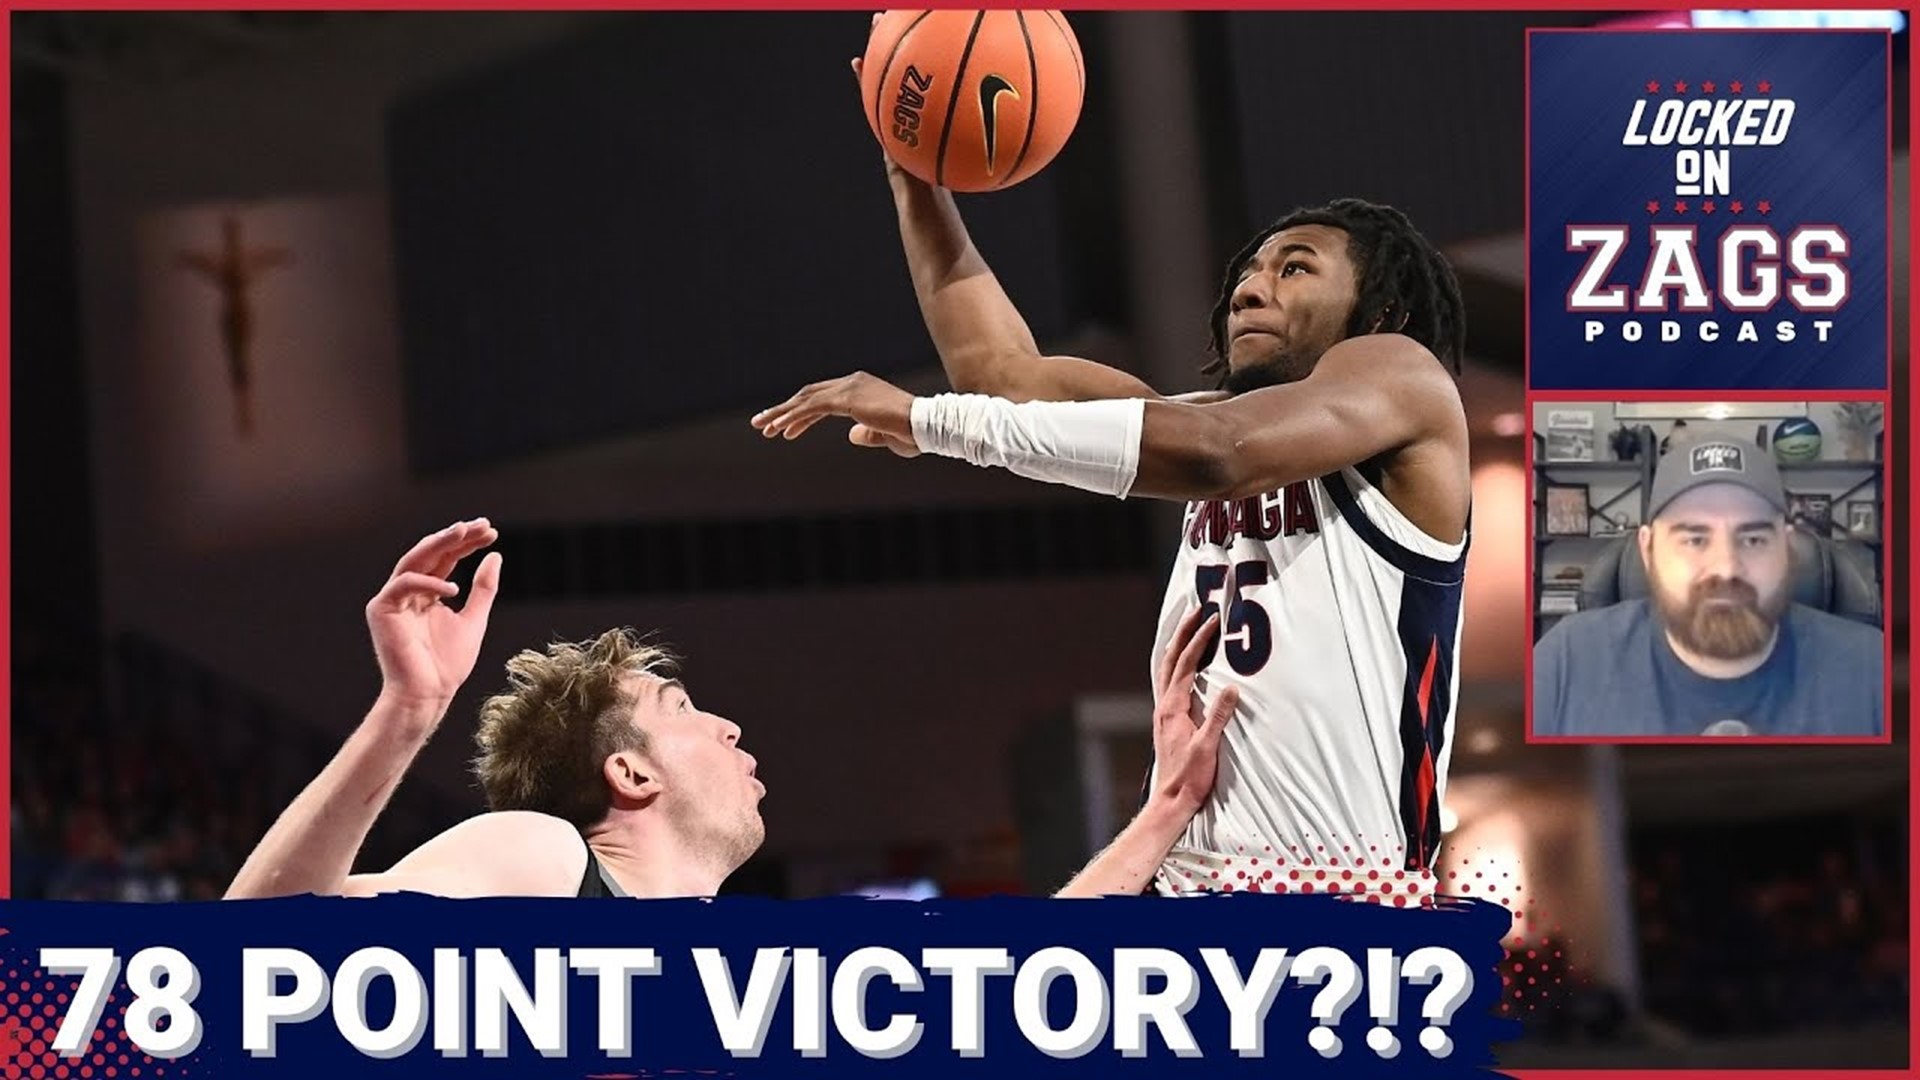 The Gonzaga Bulldogs absolutely dominated Eastern Oregon in an exhibition game at The Kennel.